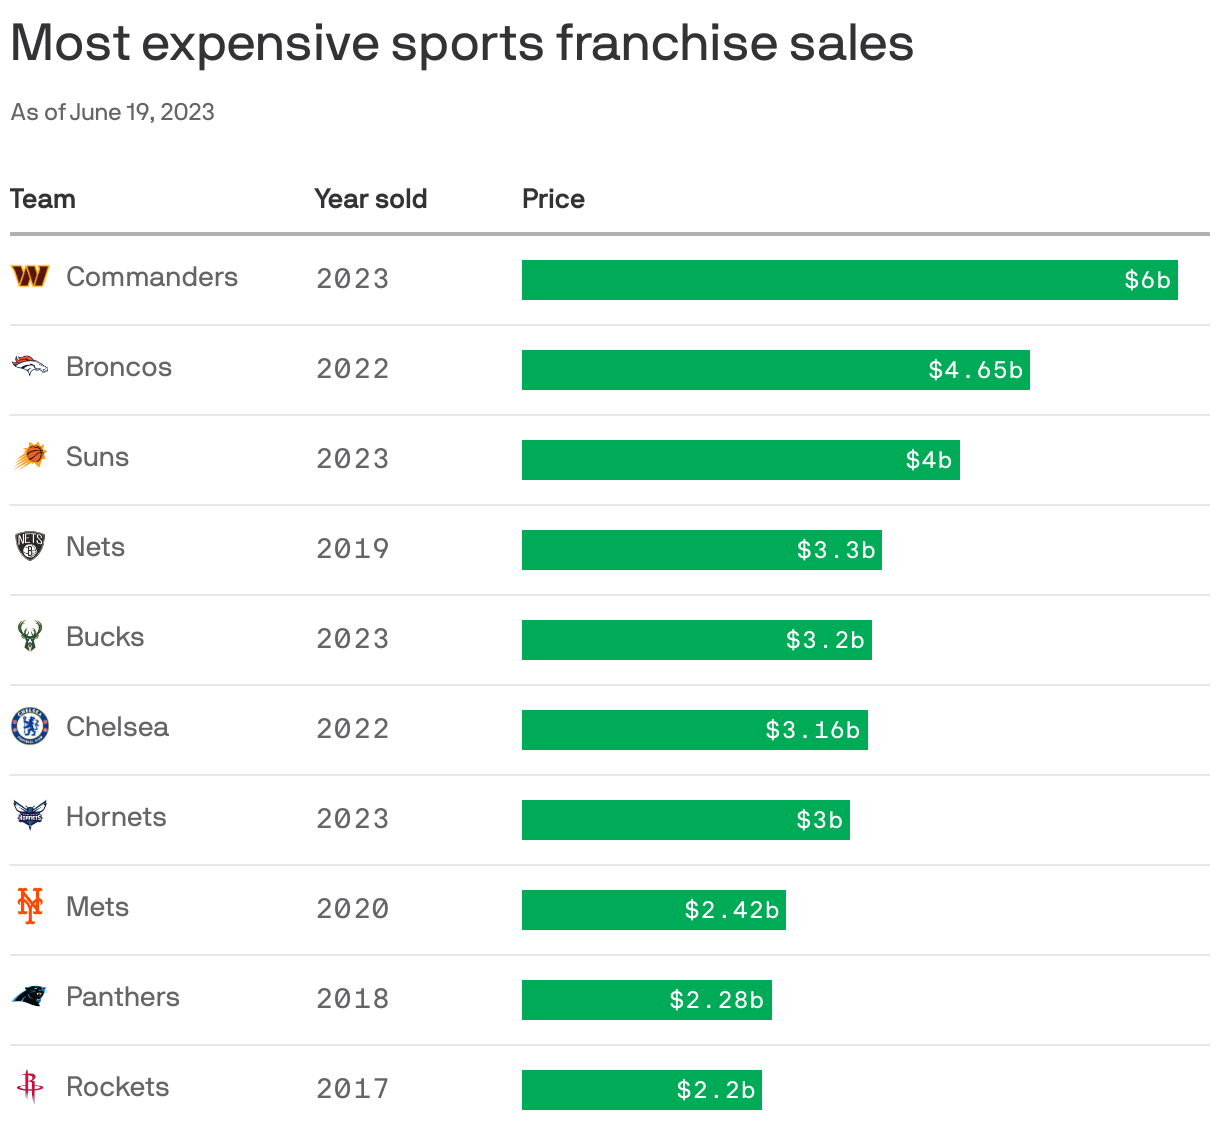 Most expensive sports franchise sales